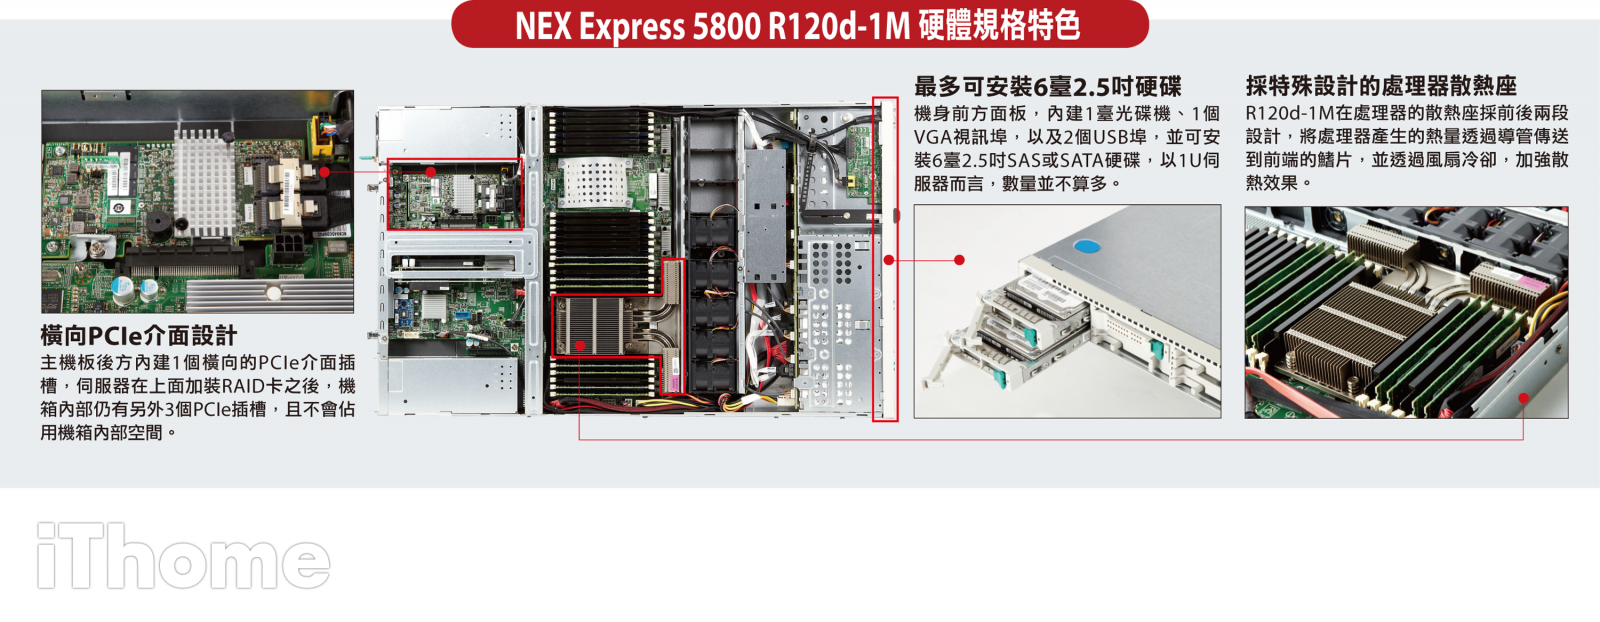 NEC Express5800 R120d-1M | iThome